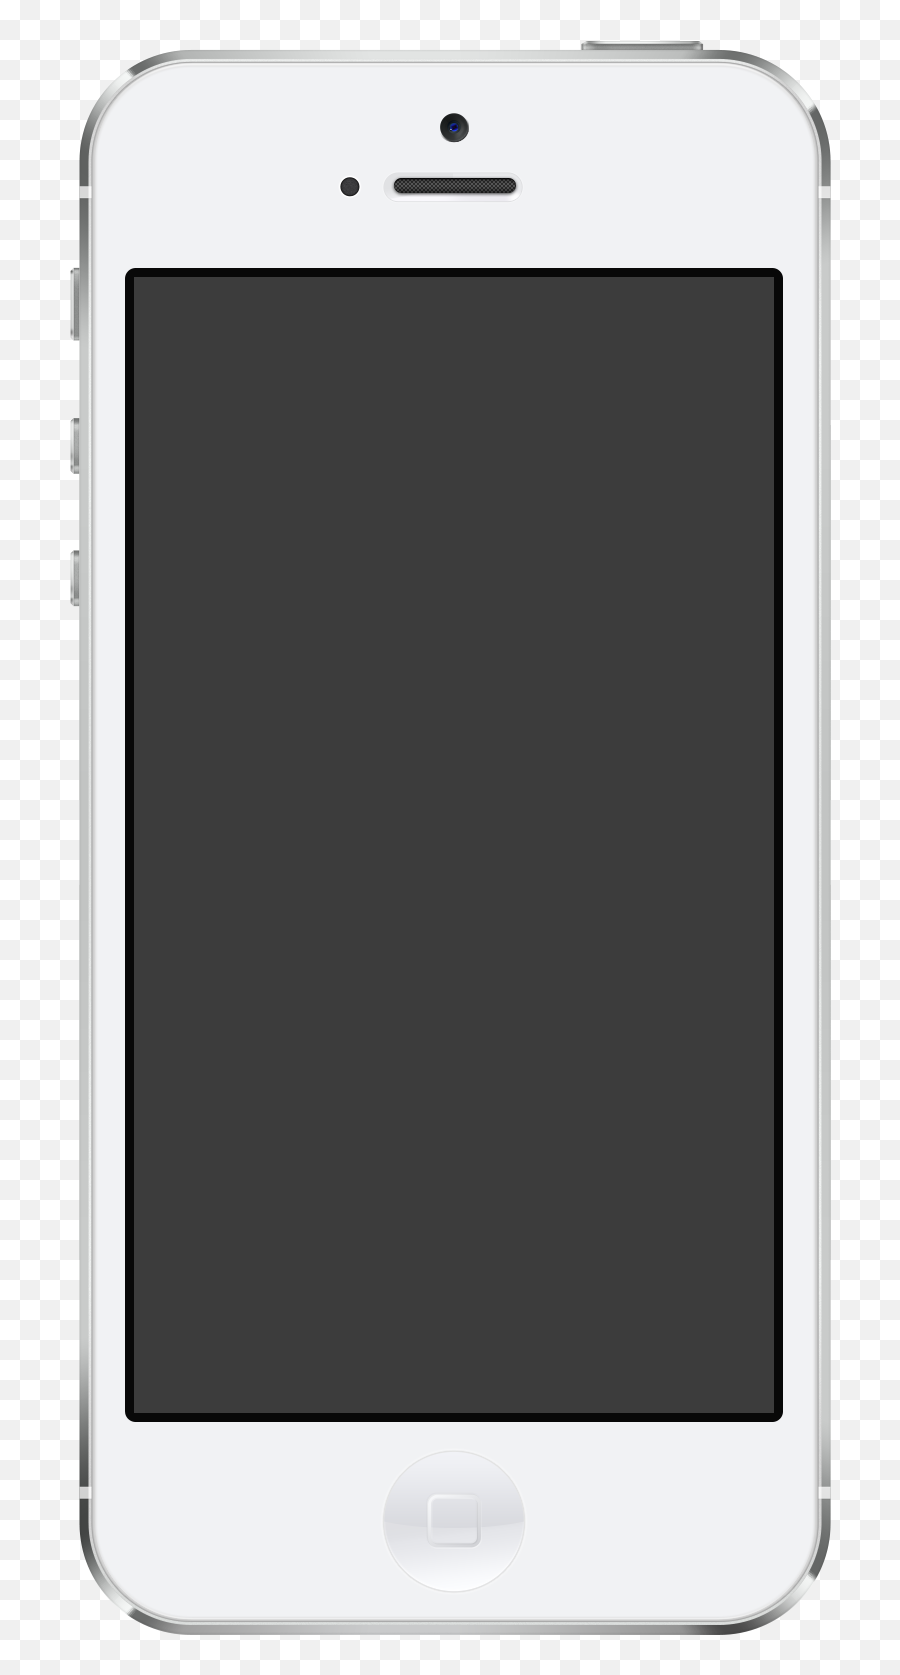 25 Iphones Png Images For Free Download - Apple,Iphone 5 Png